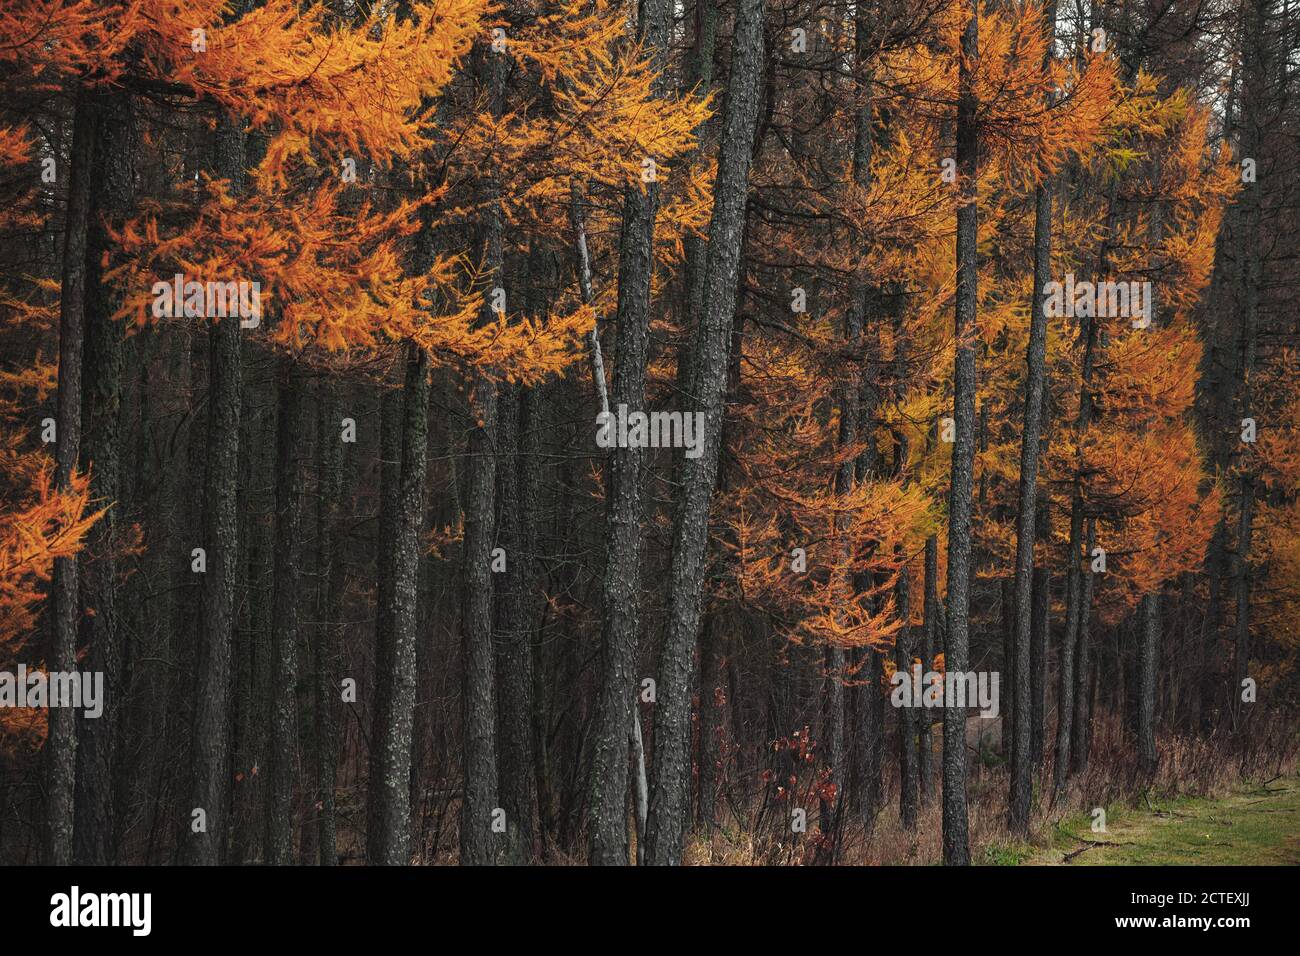 Dark autumn forest background photo with larch trees Stock Photo